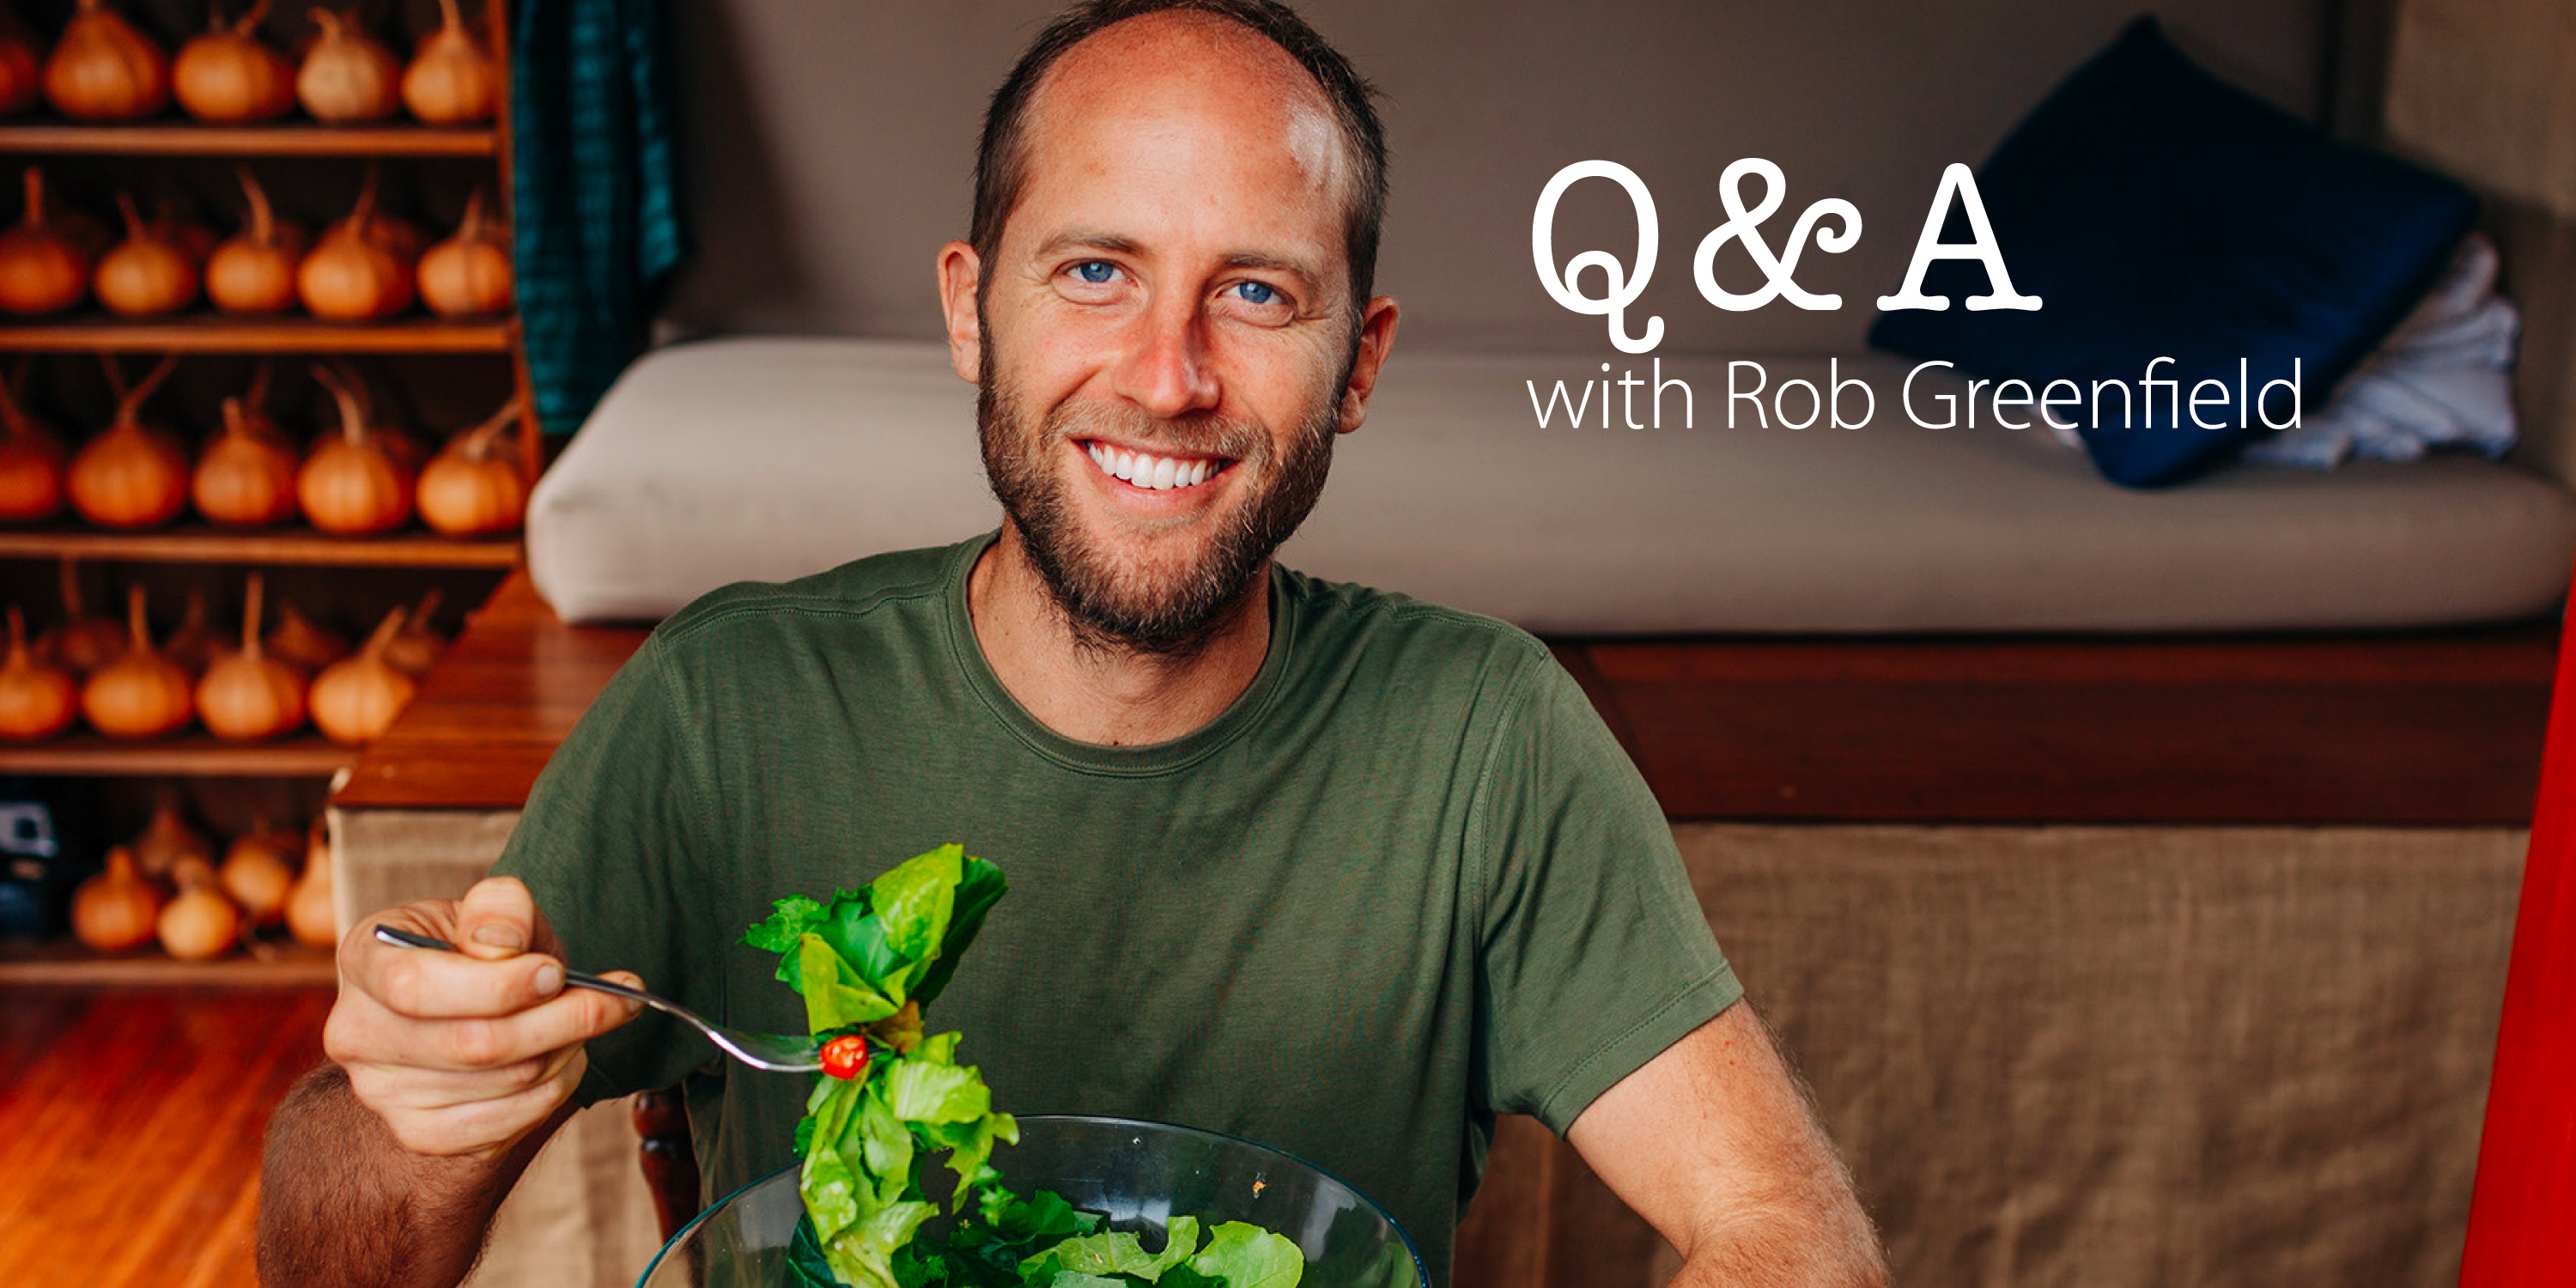 Q&A with Rob Greenfield